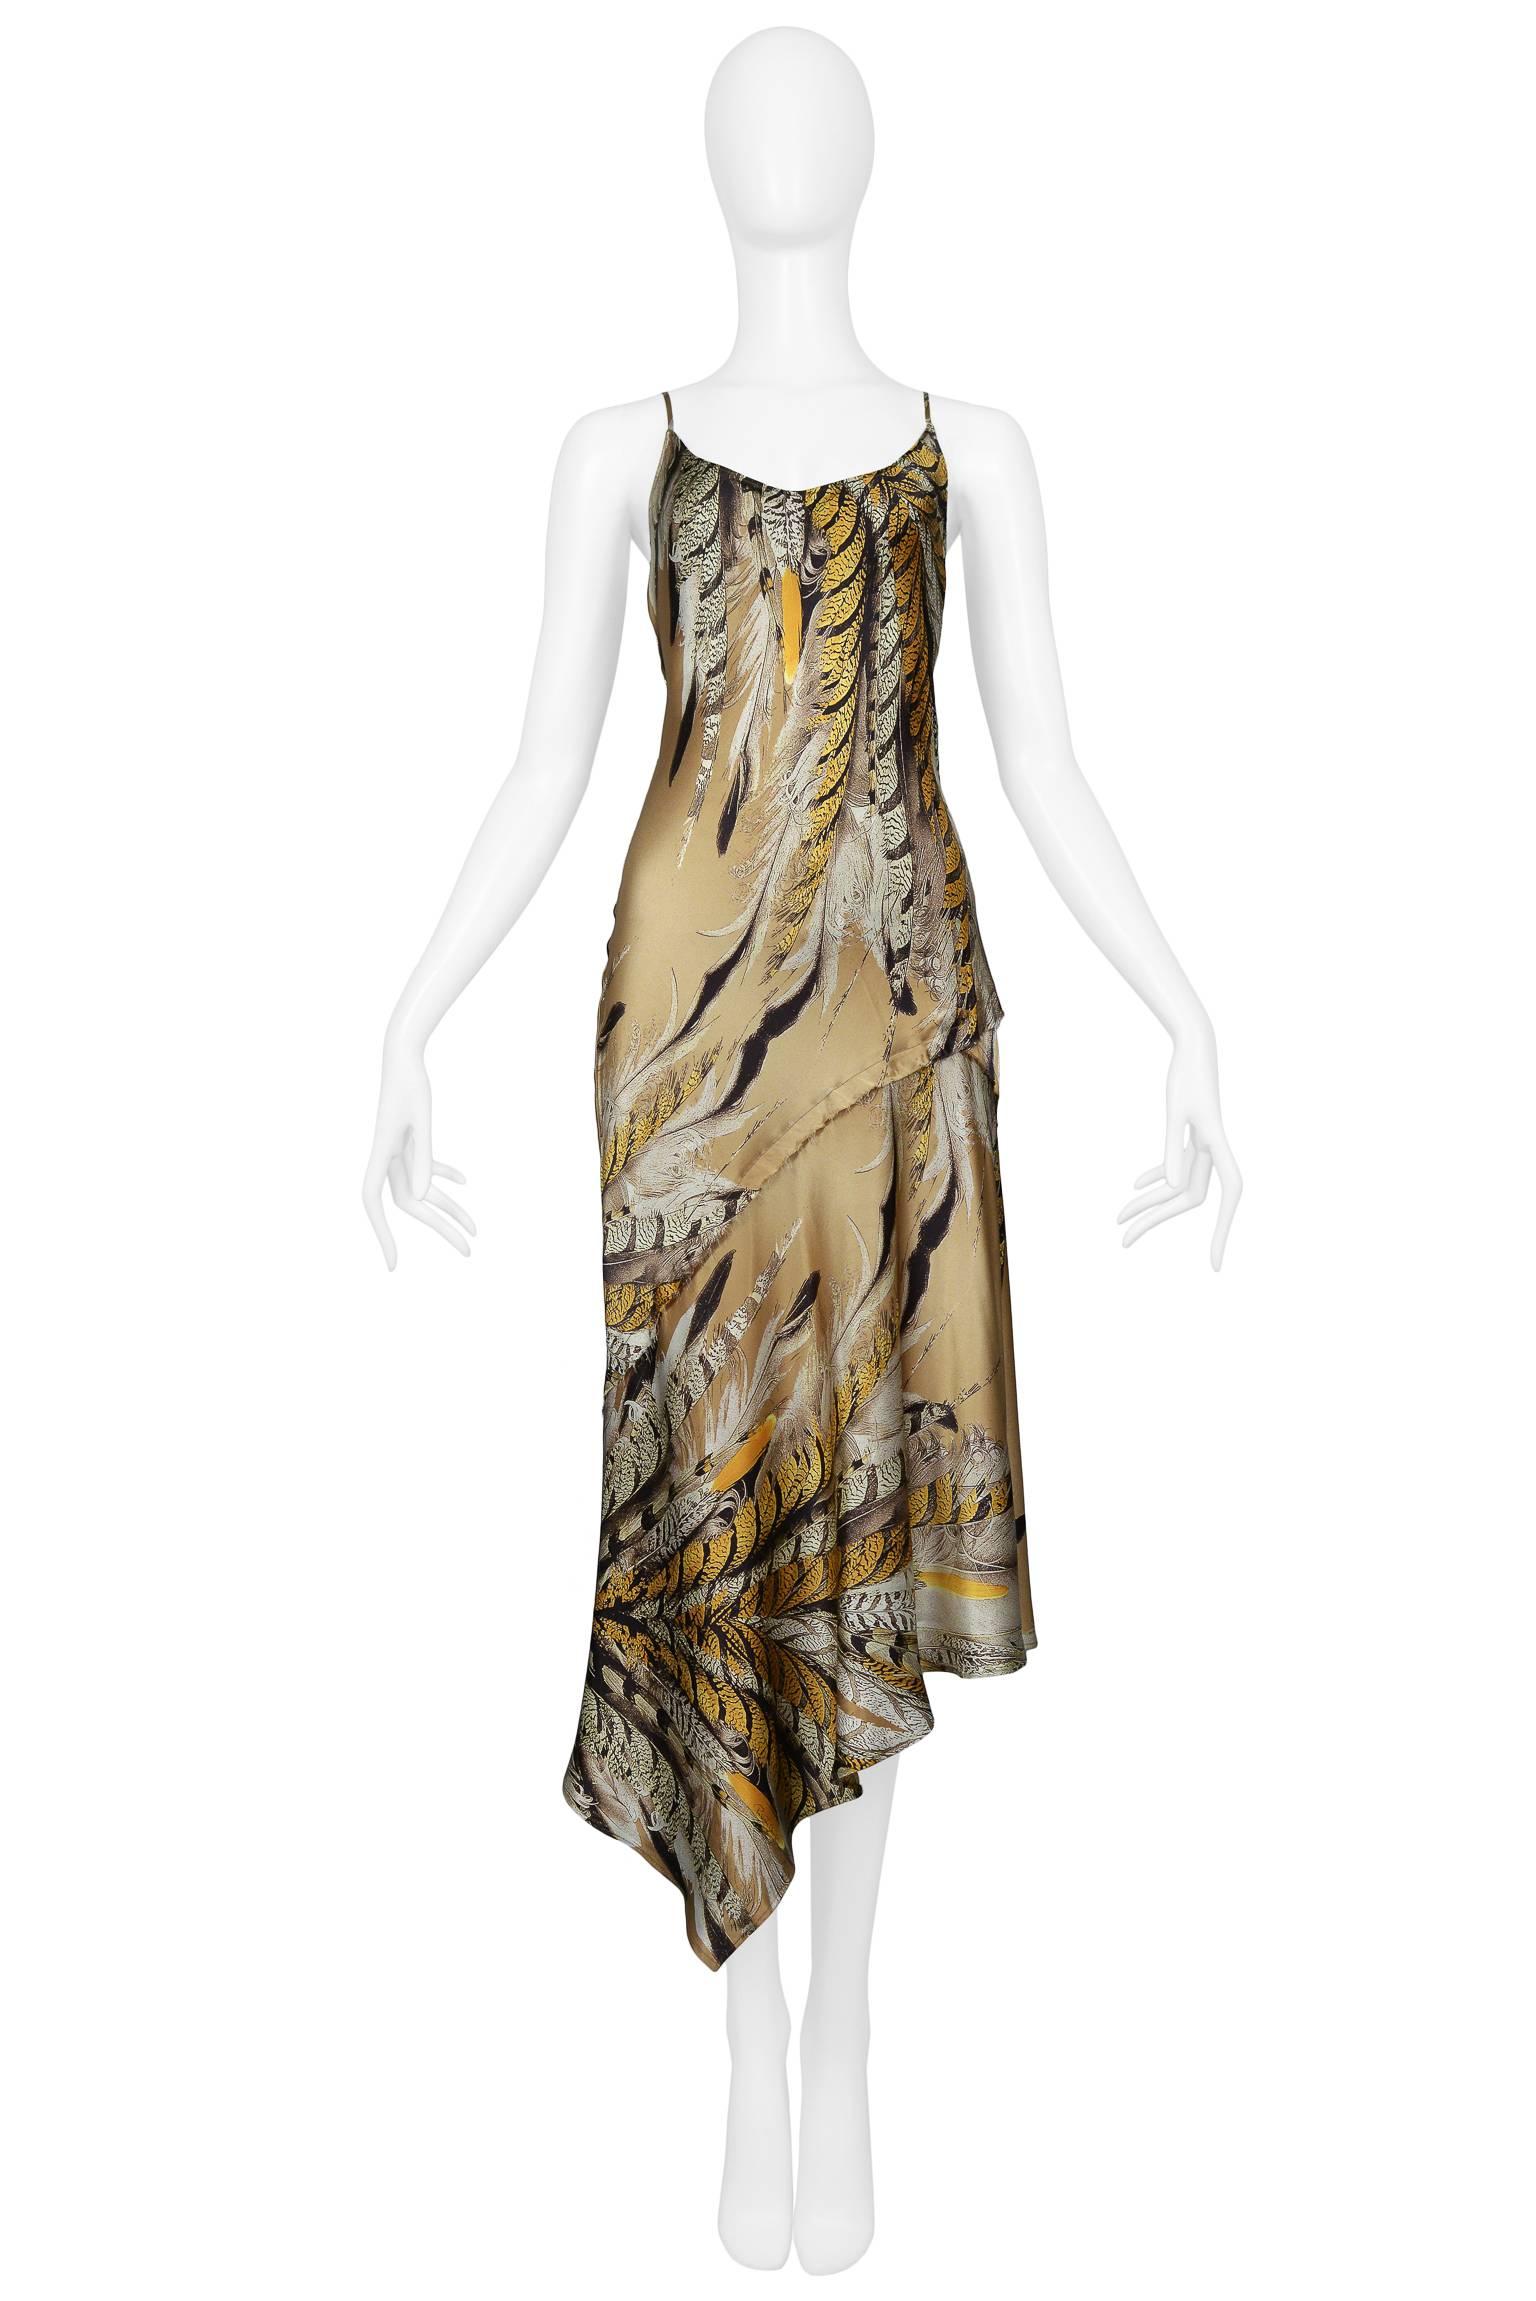 Roberto Cavalli satin neutral and golden tone feather print slip dress with spaghetti straps, asymmetrical hem, deep plunging open cowl back and some open and raw seams. Gorgeous fit. 